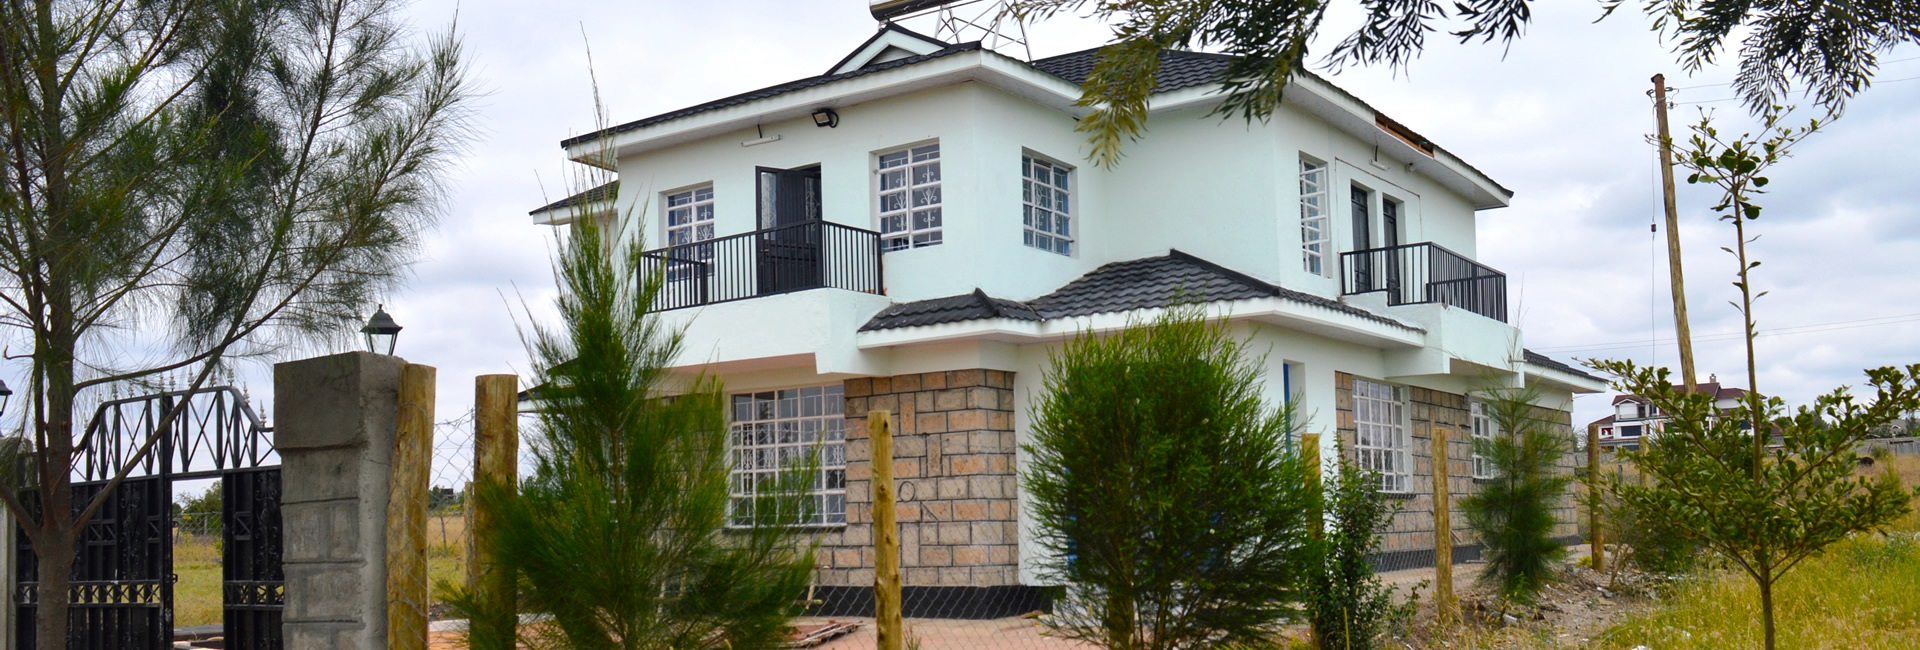 optiven home finished projects